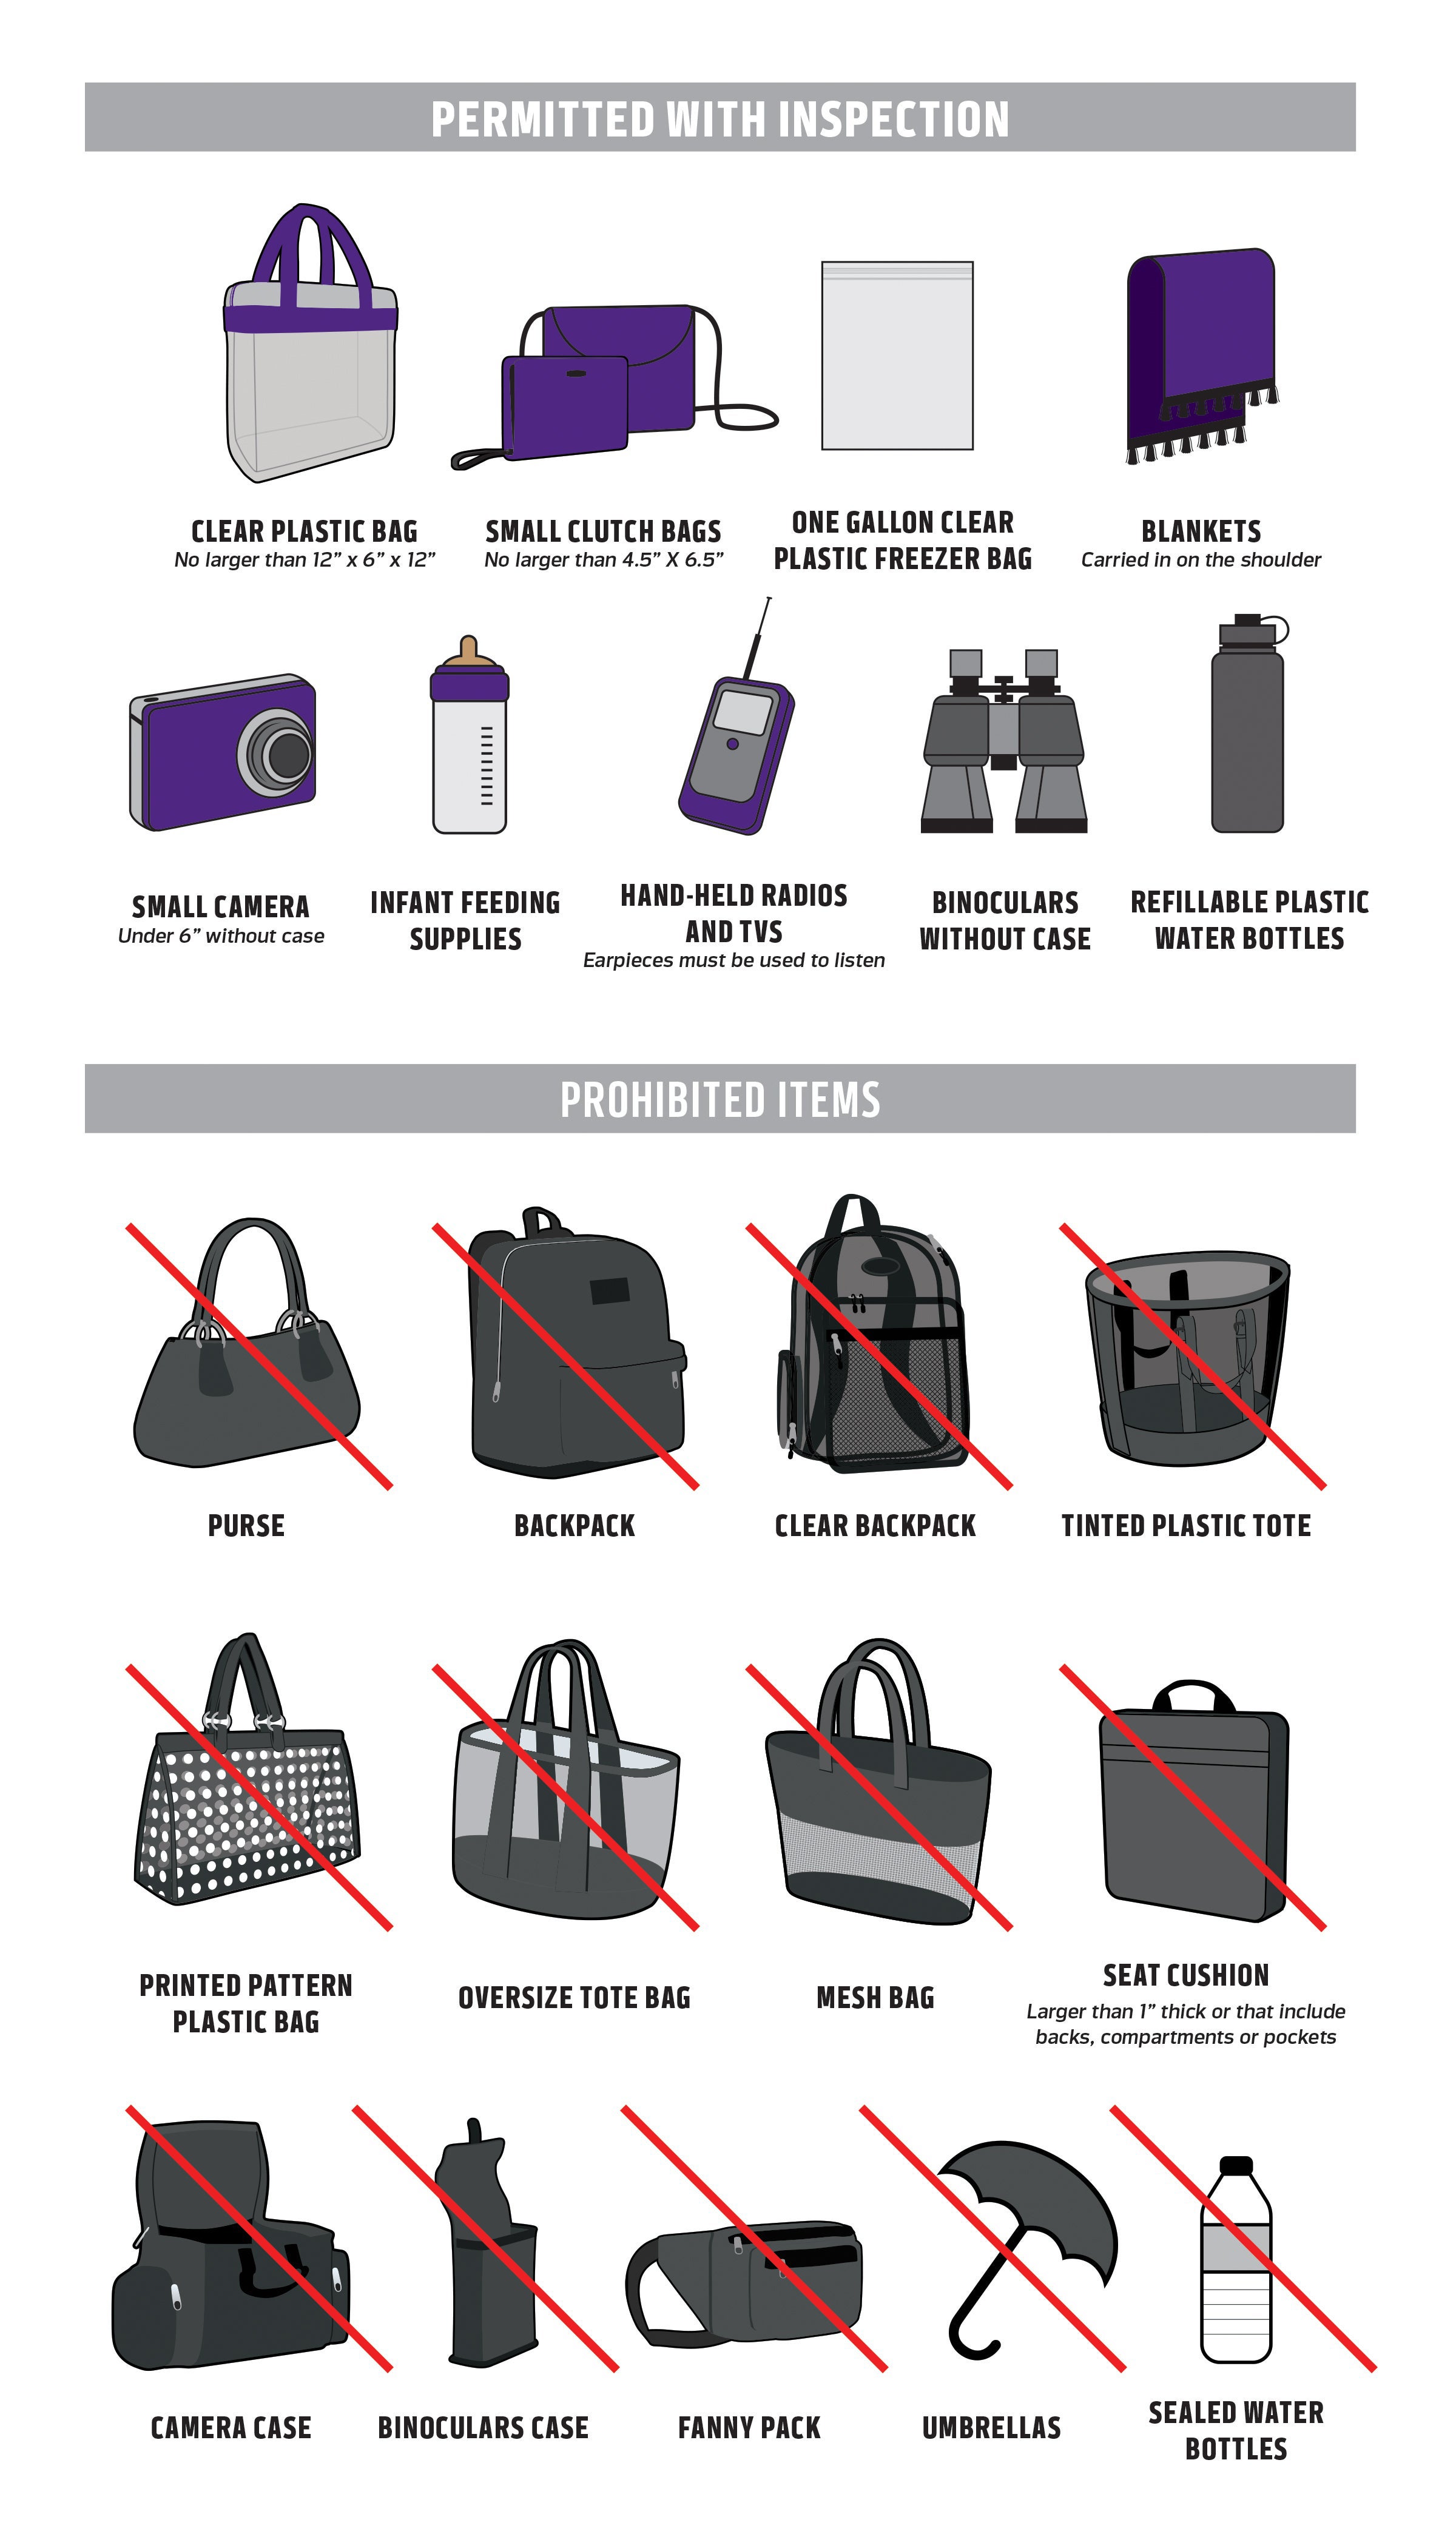 MLB bag policies: Which bags are permitted at the ballpark?